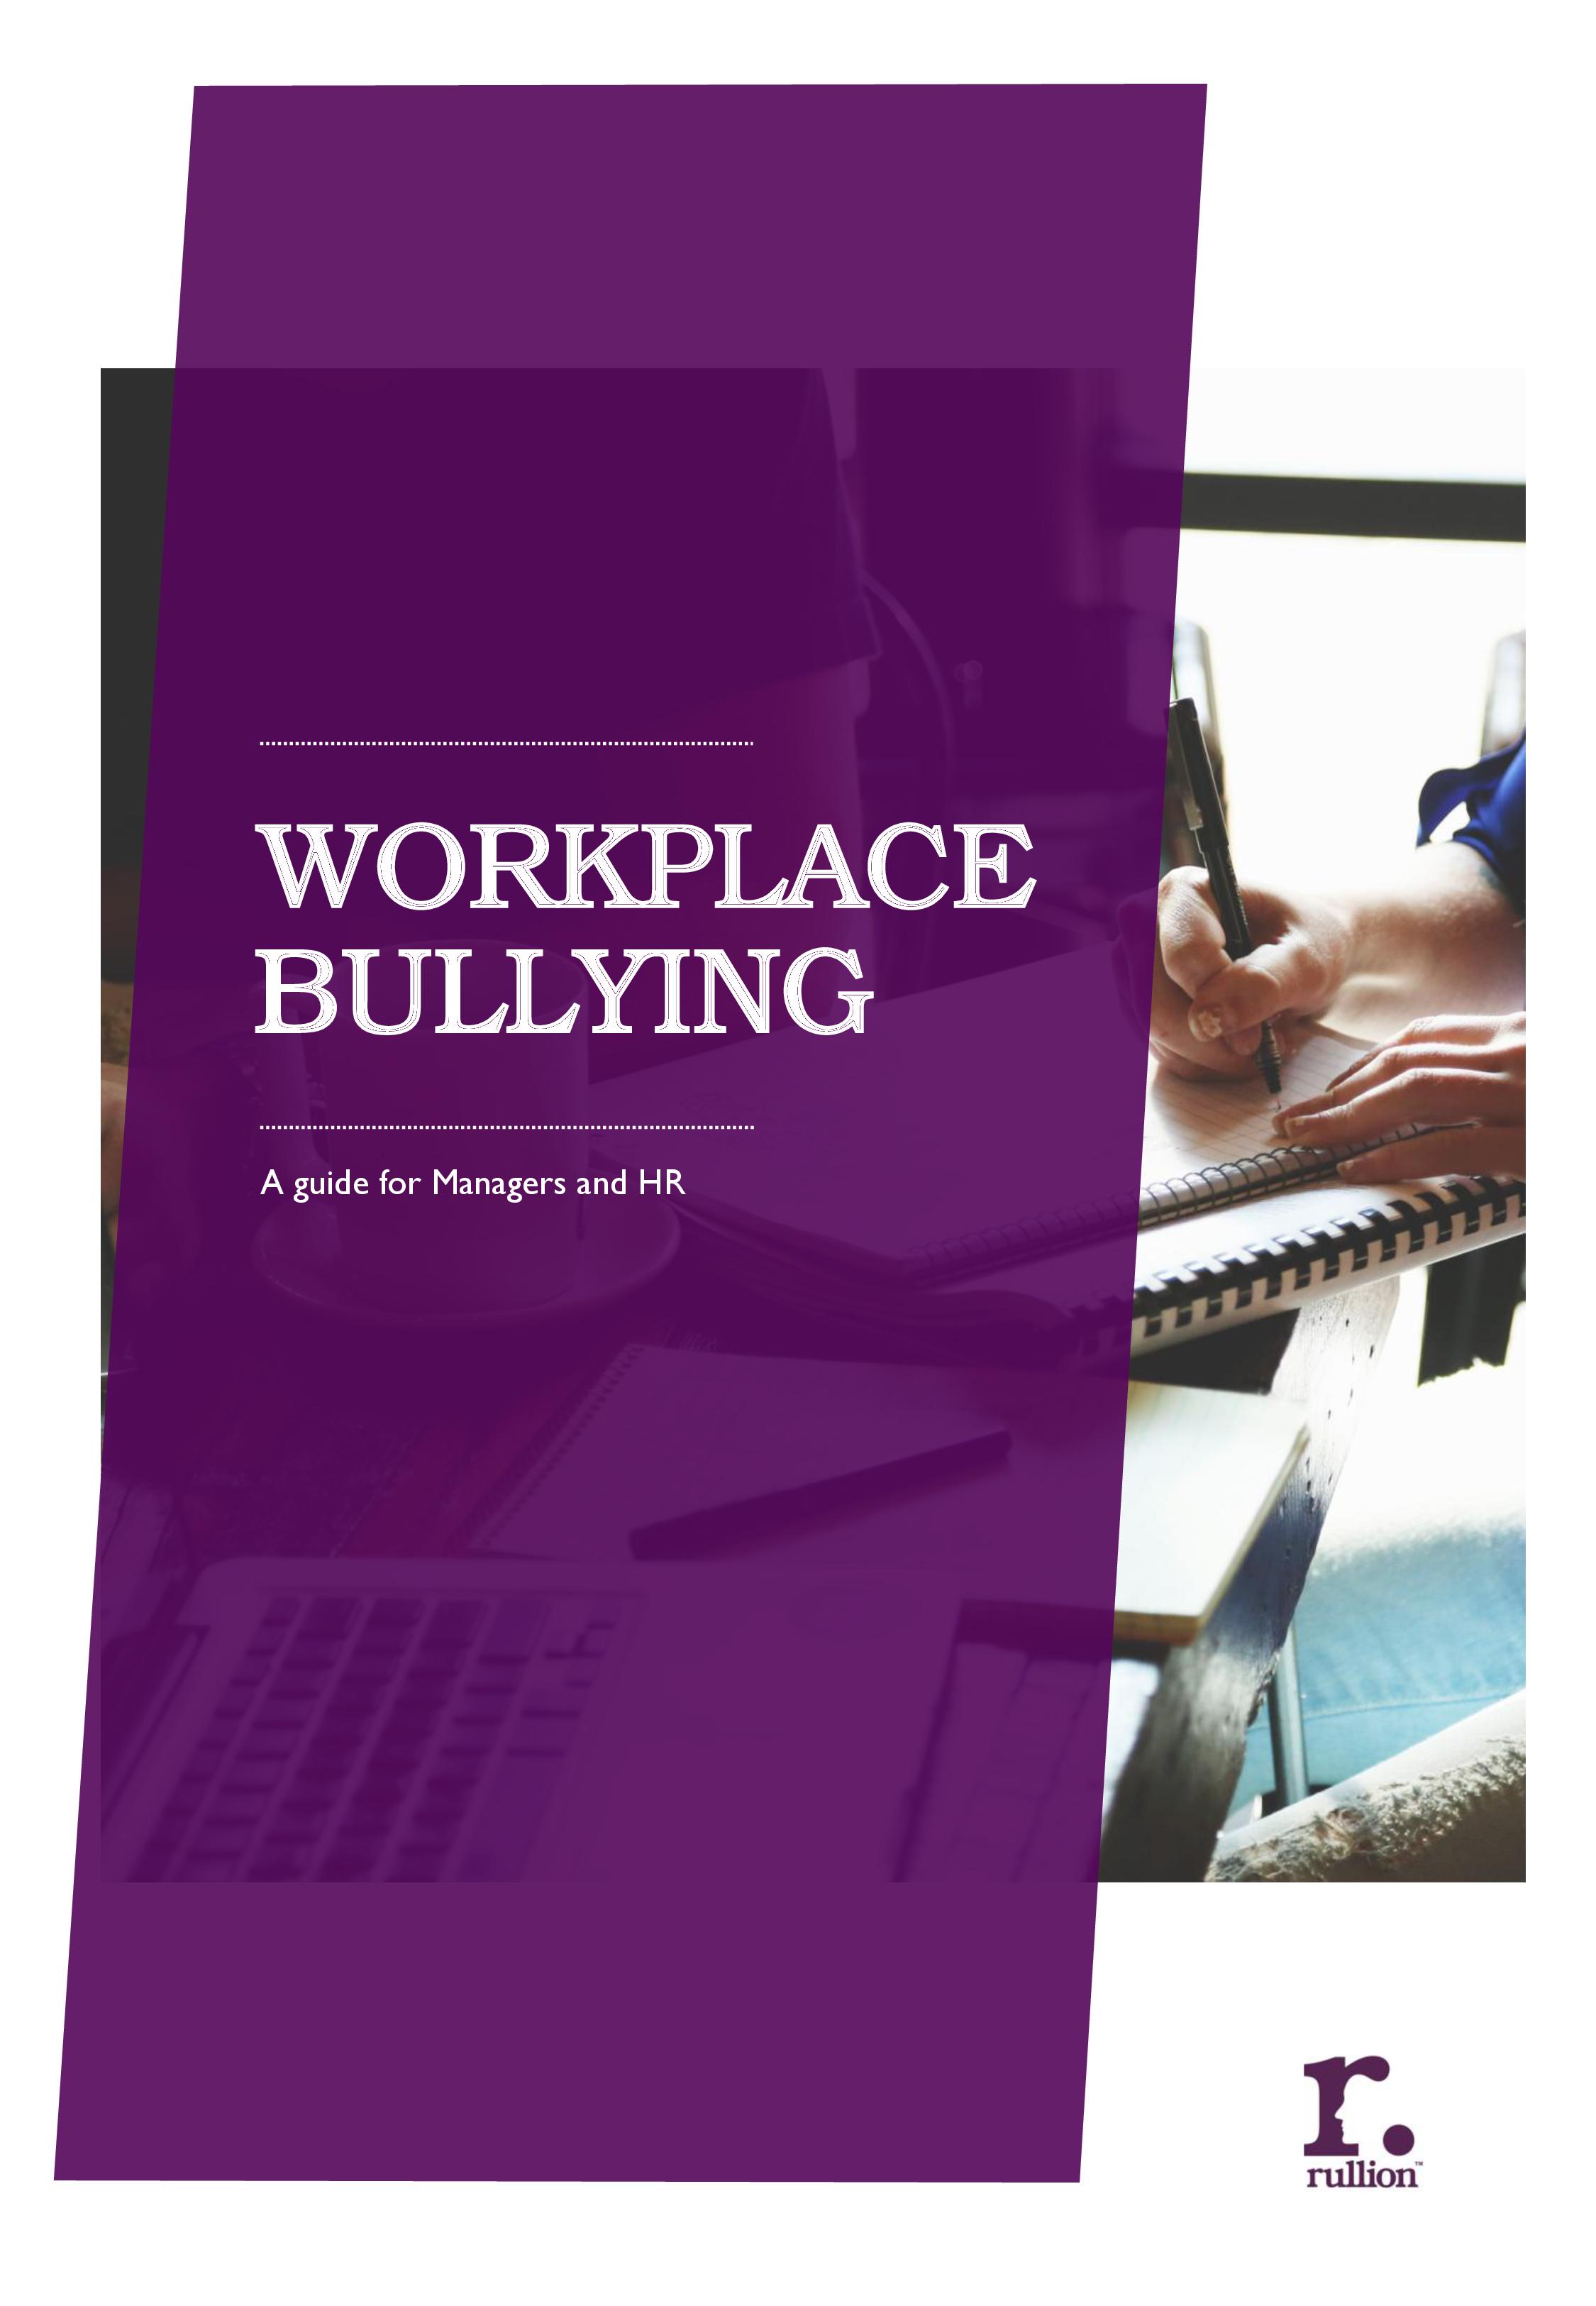 RESEARCH REPORT: WORKPLACE BULLYING